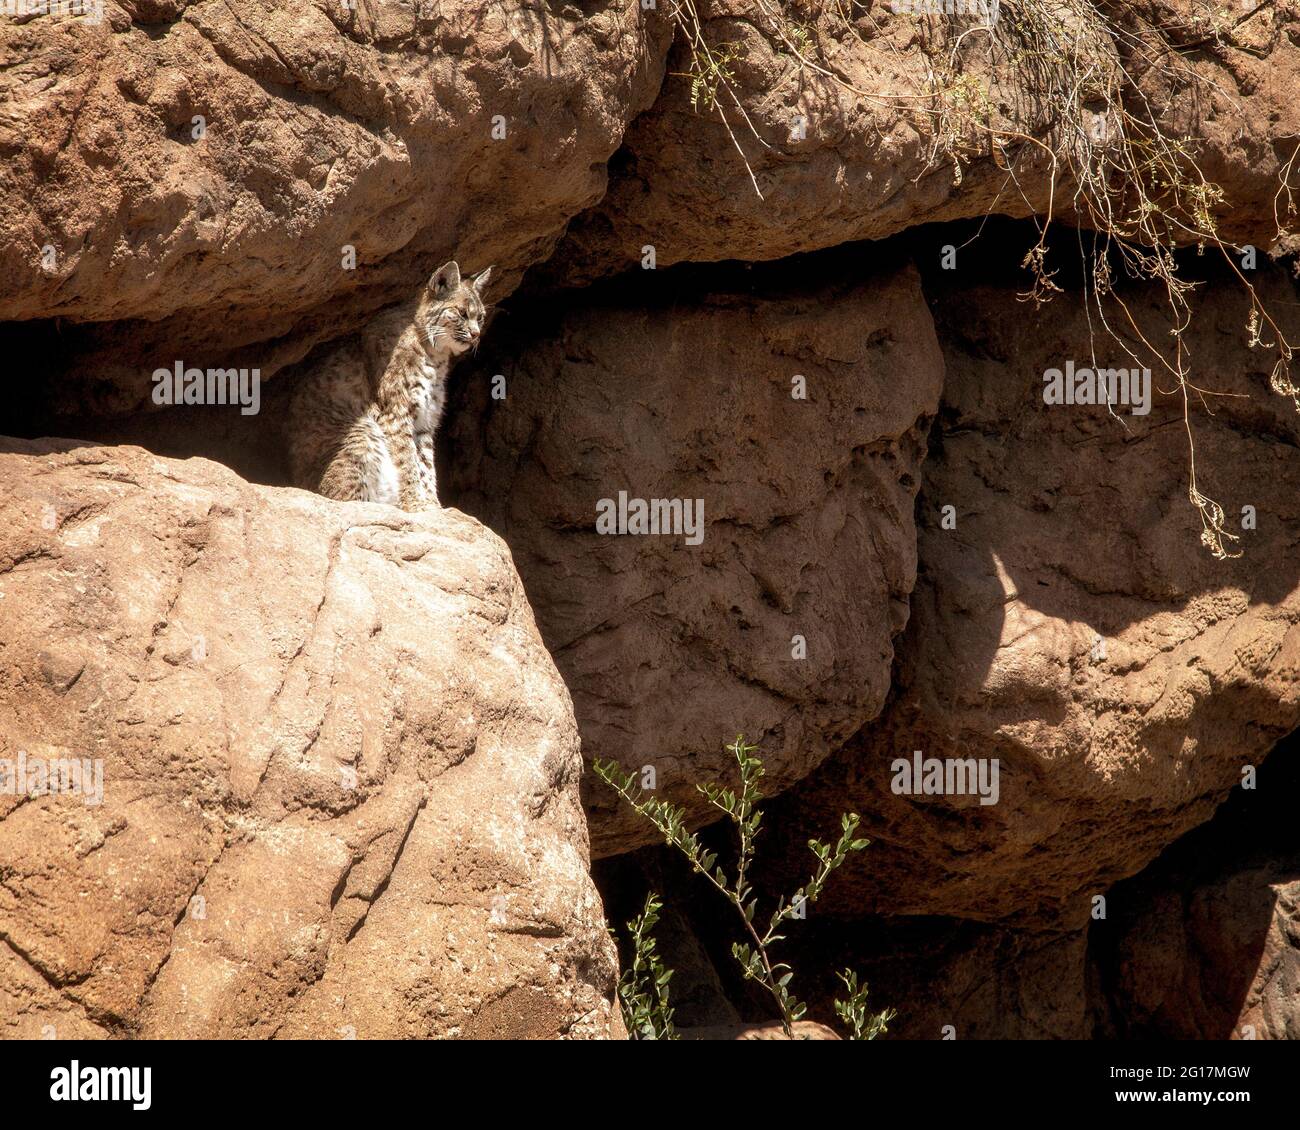 A Bobcat blends in with the desert rock at the Arizona Sonora Desert Museum near Tucson. Stock Photo